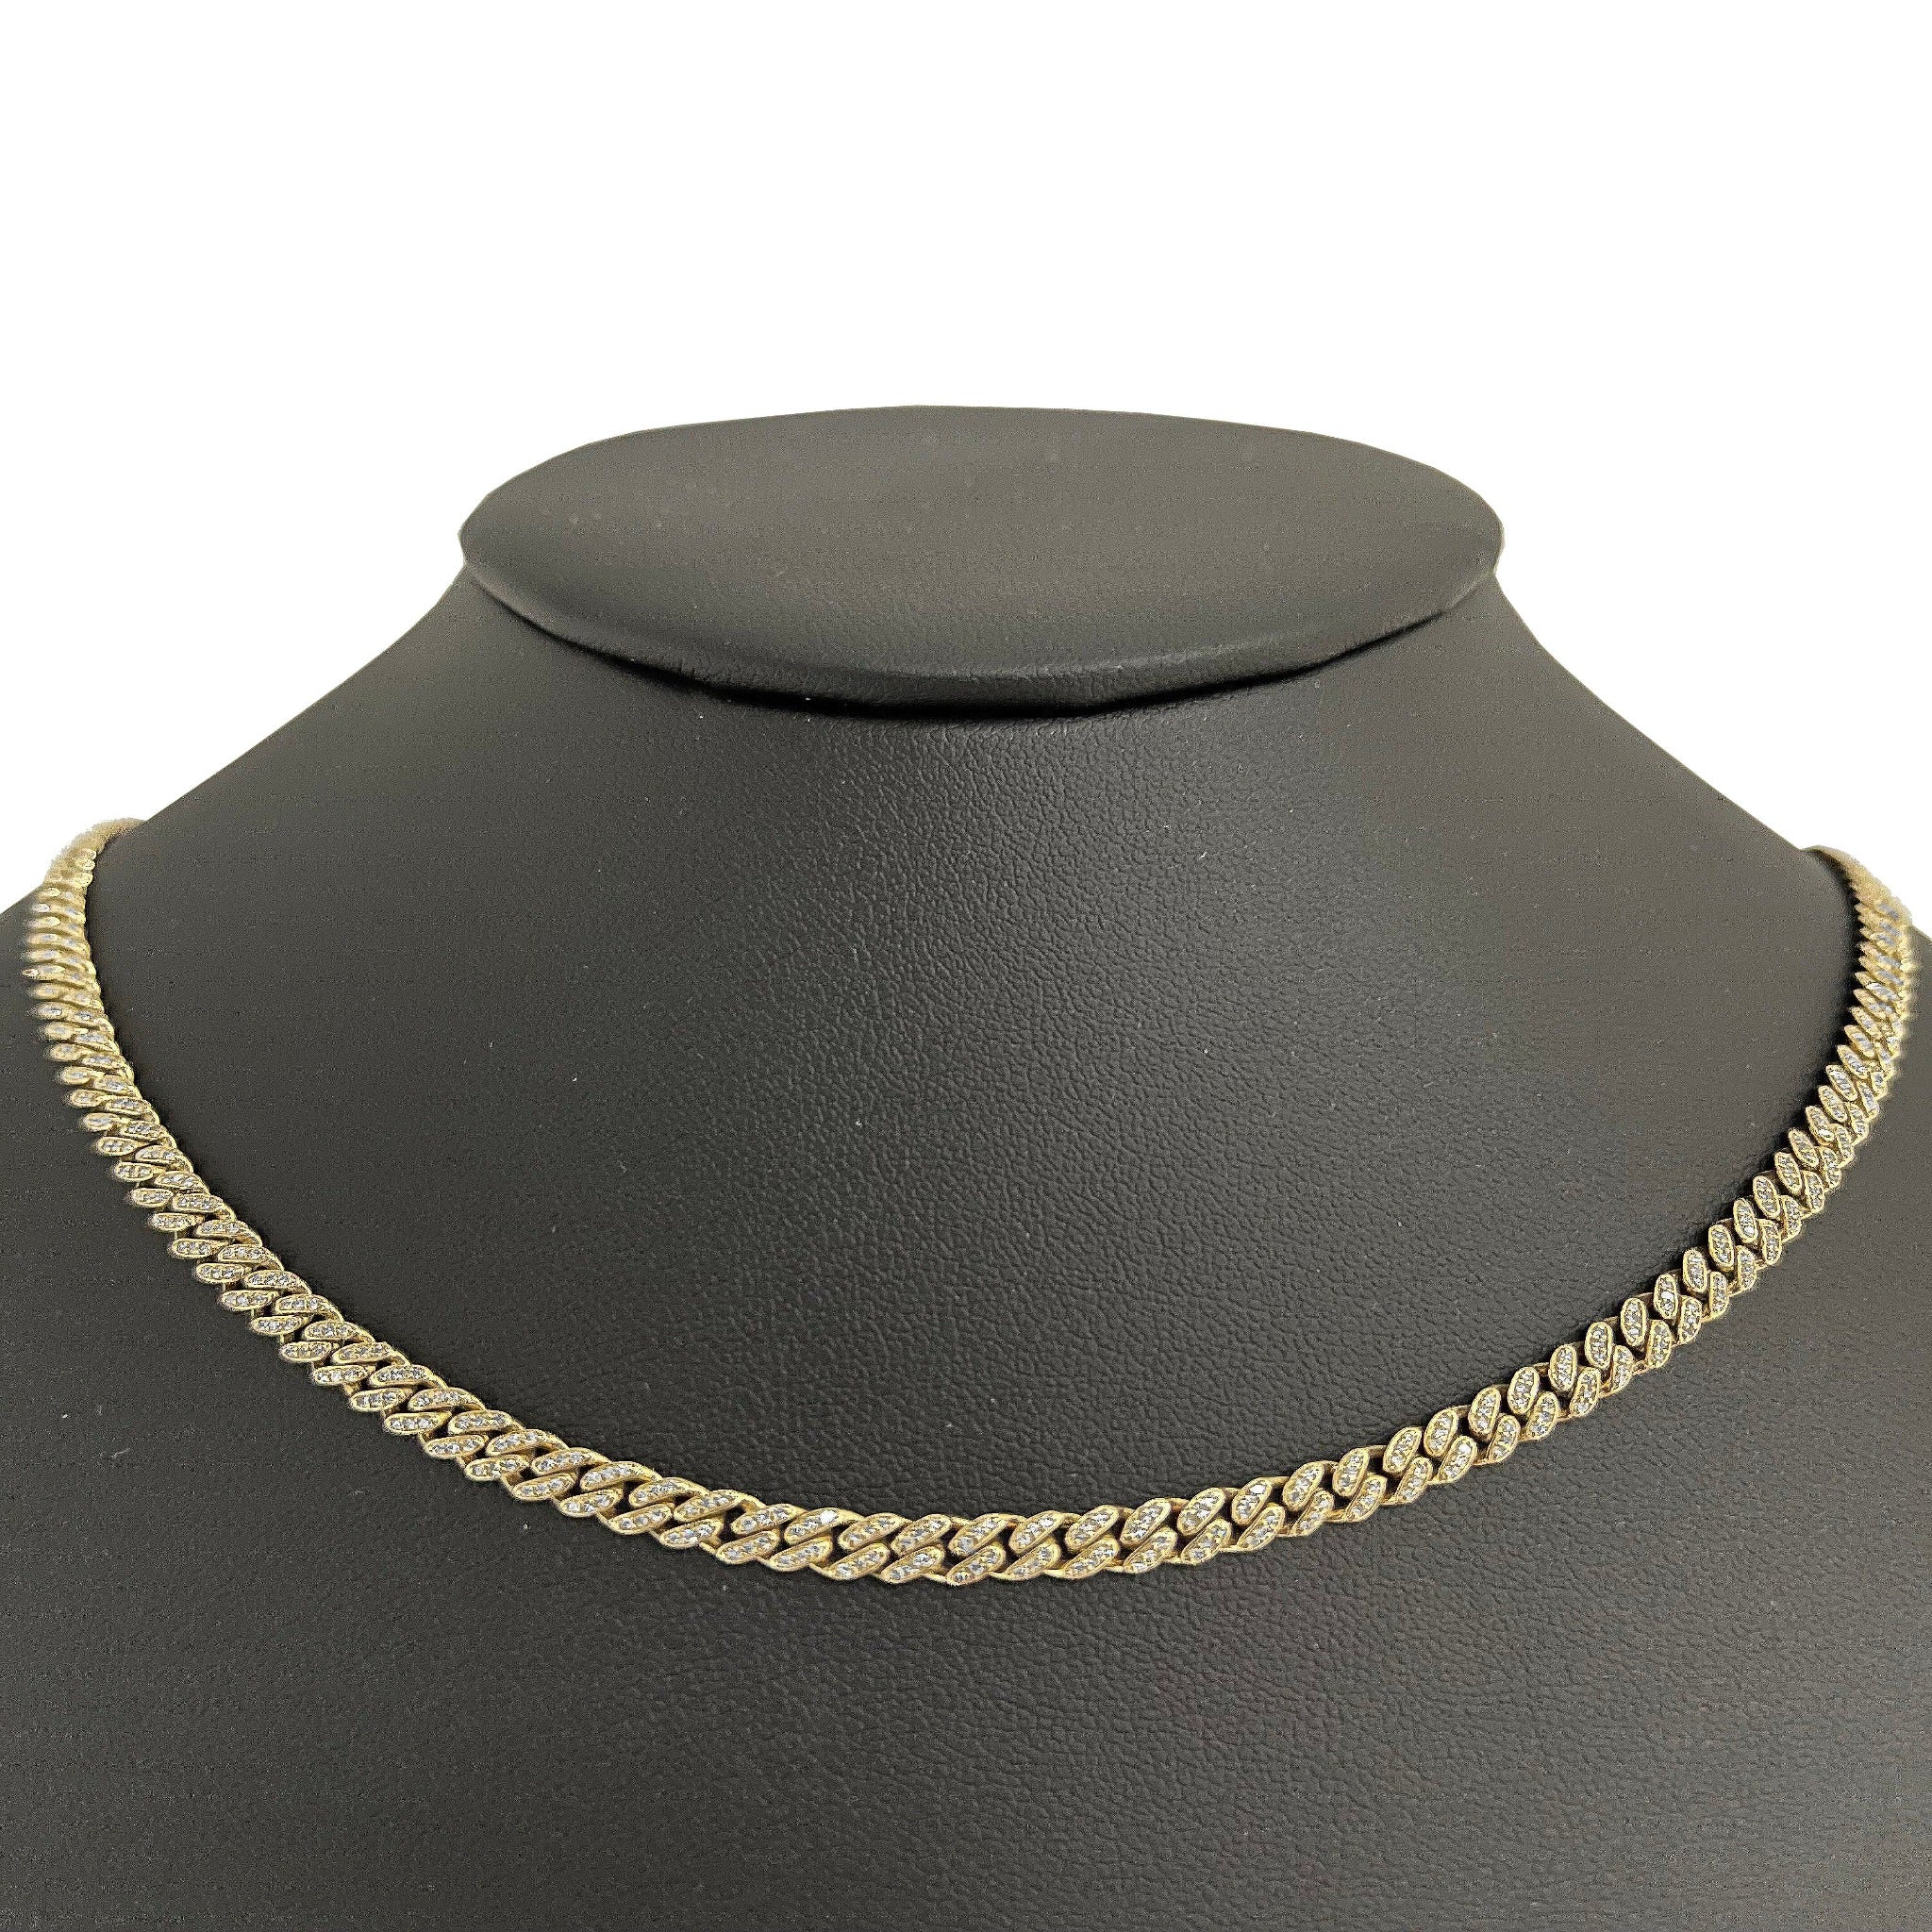 ''SPECIAL! 4mm 1.79ct 14k Yellow GOLD Diamond Round Cuban Necklace 18''''''